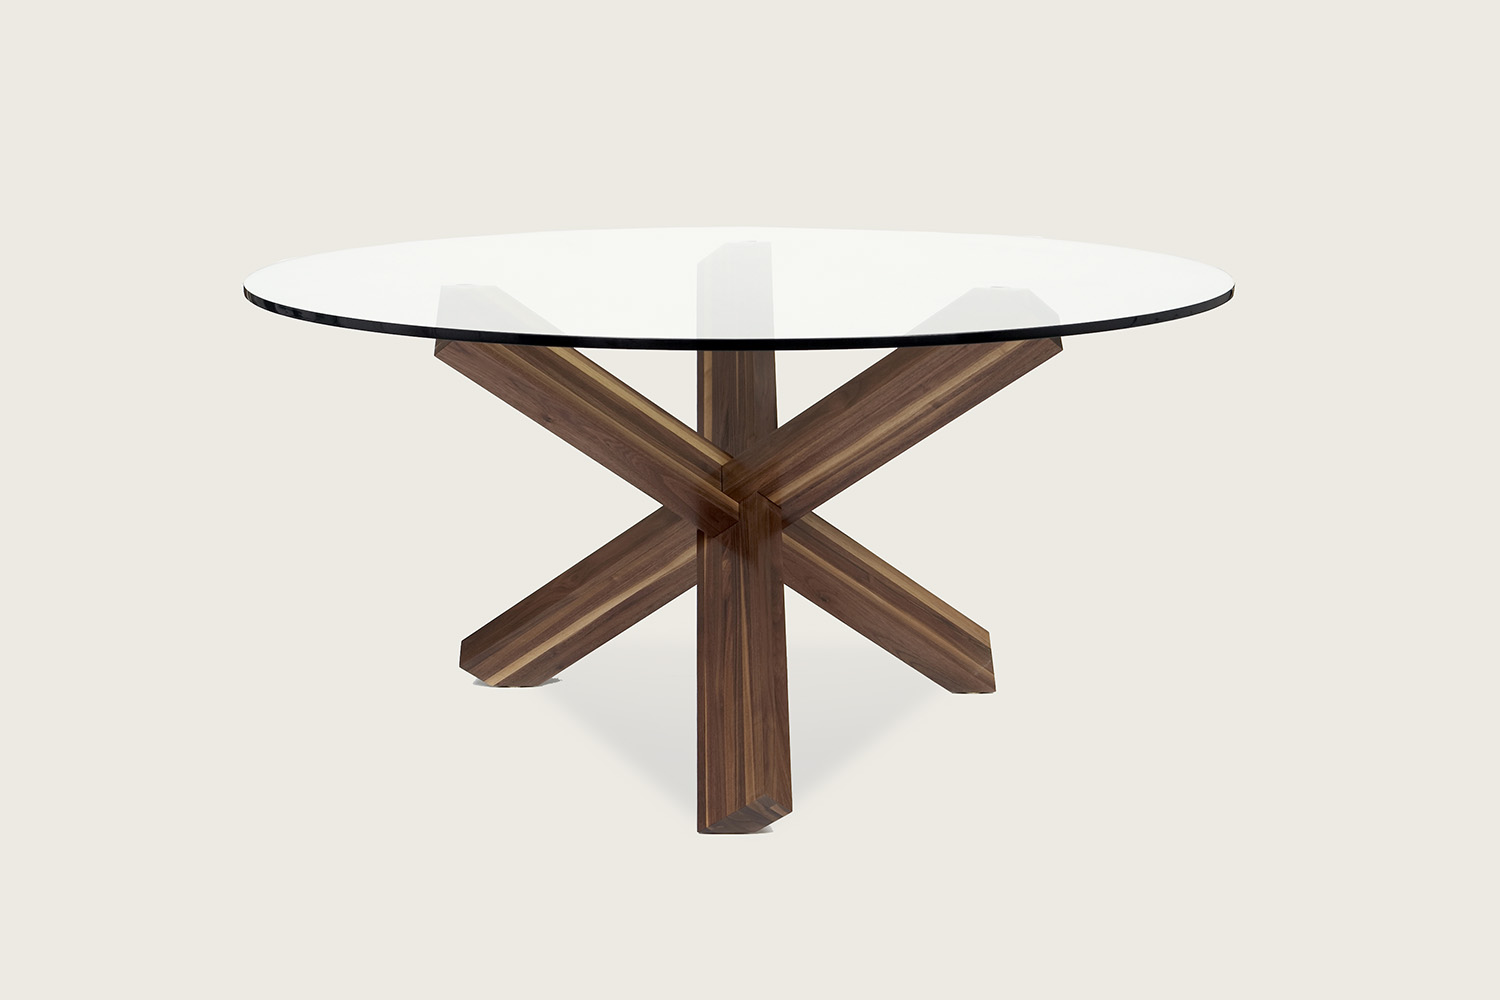 Think Pedestal Dining Table in solid walnut with glass top - Speke Klein